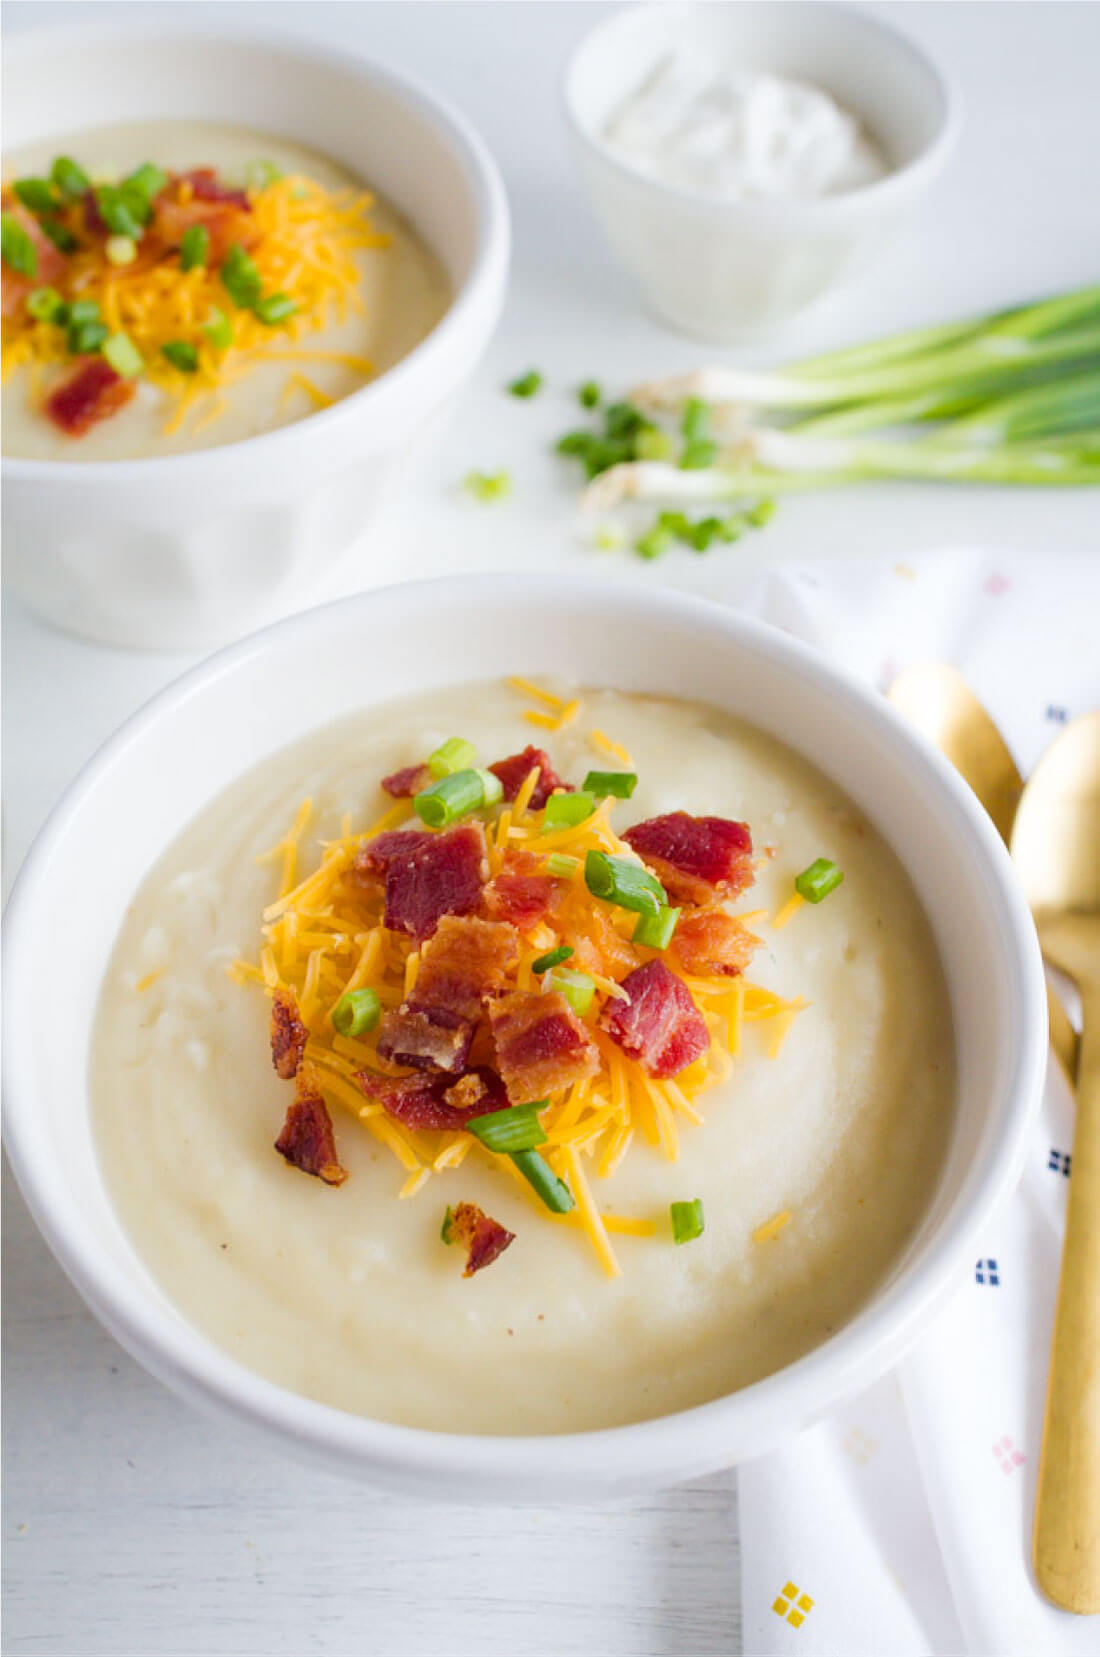 Slow Cooker Baked Potato Soup - perfect main dish recipe for a chilly day! from www.thirtyhandmadedays.com